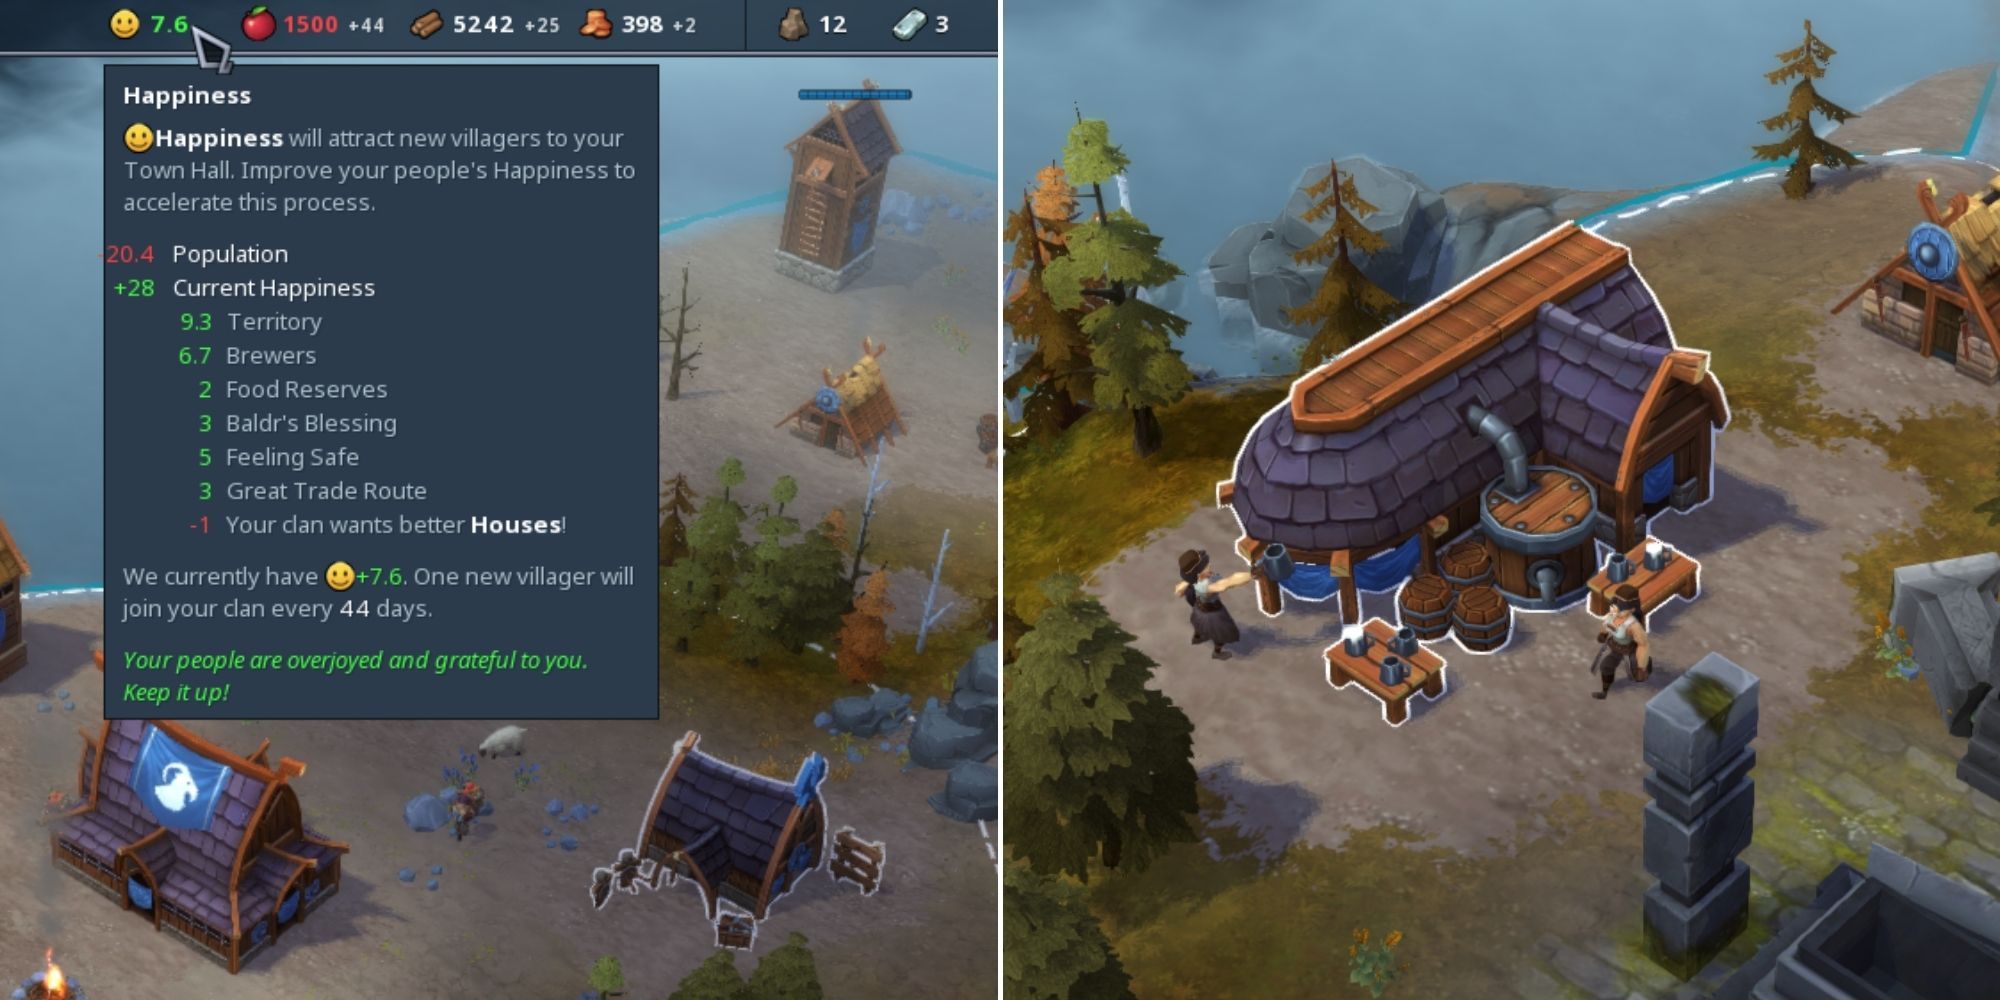 Northgard - Happiness breakdown details - The Brewery 